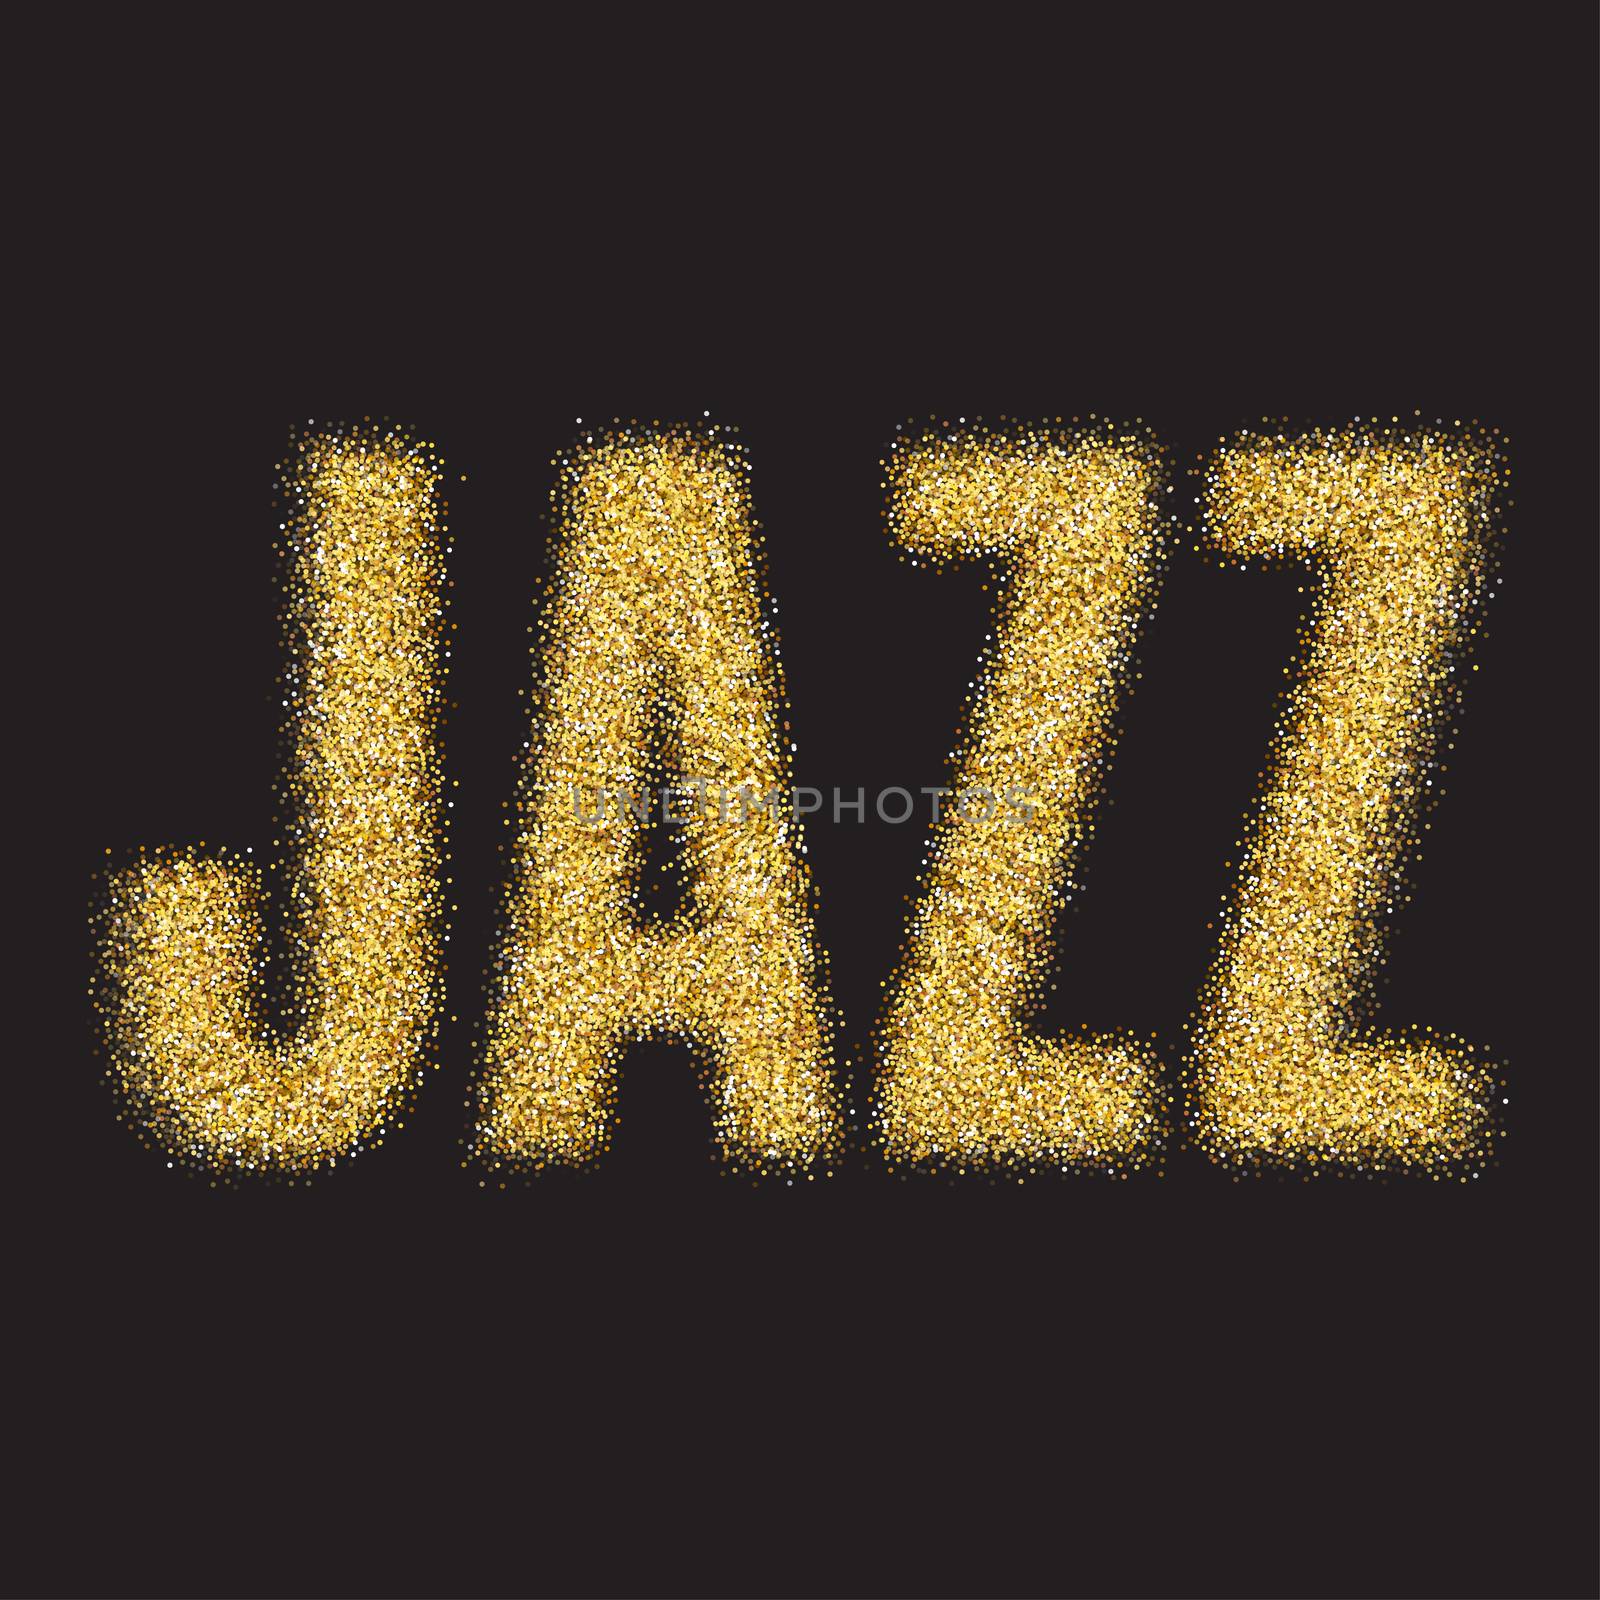 Gold glitter Inscription jazz. Golden sparcle word jazz on black transparent background. Amber particles. by Elena_Garder